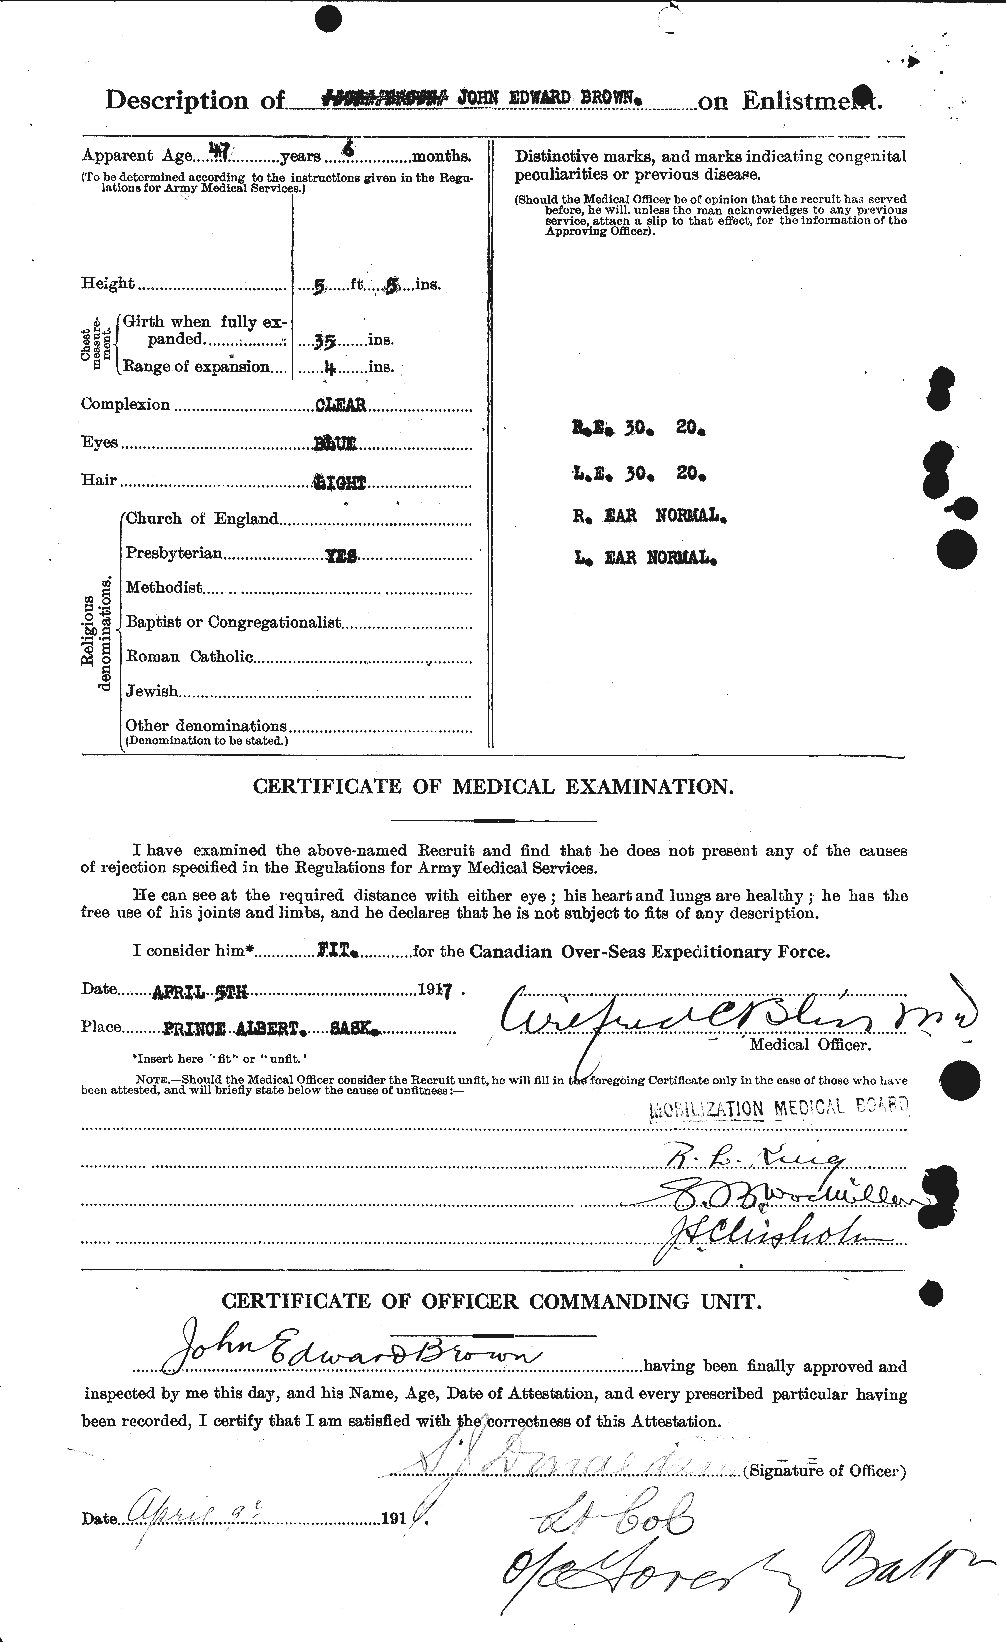 Personnel Records of the First World War - CEF 264589b